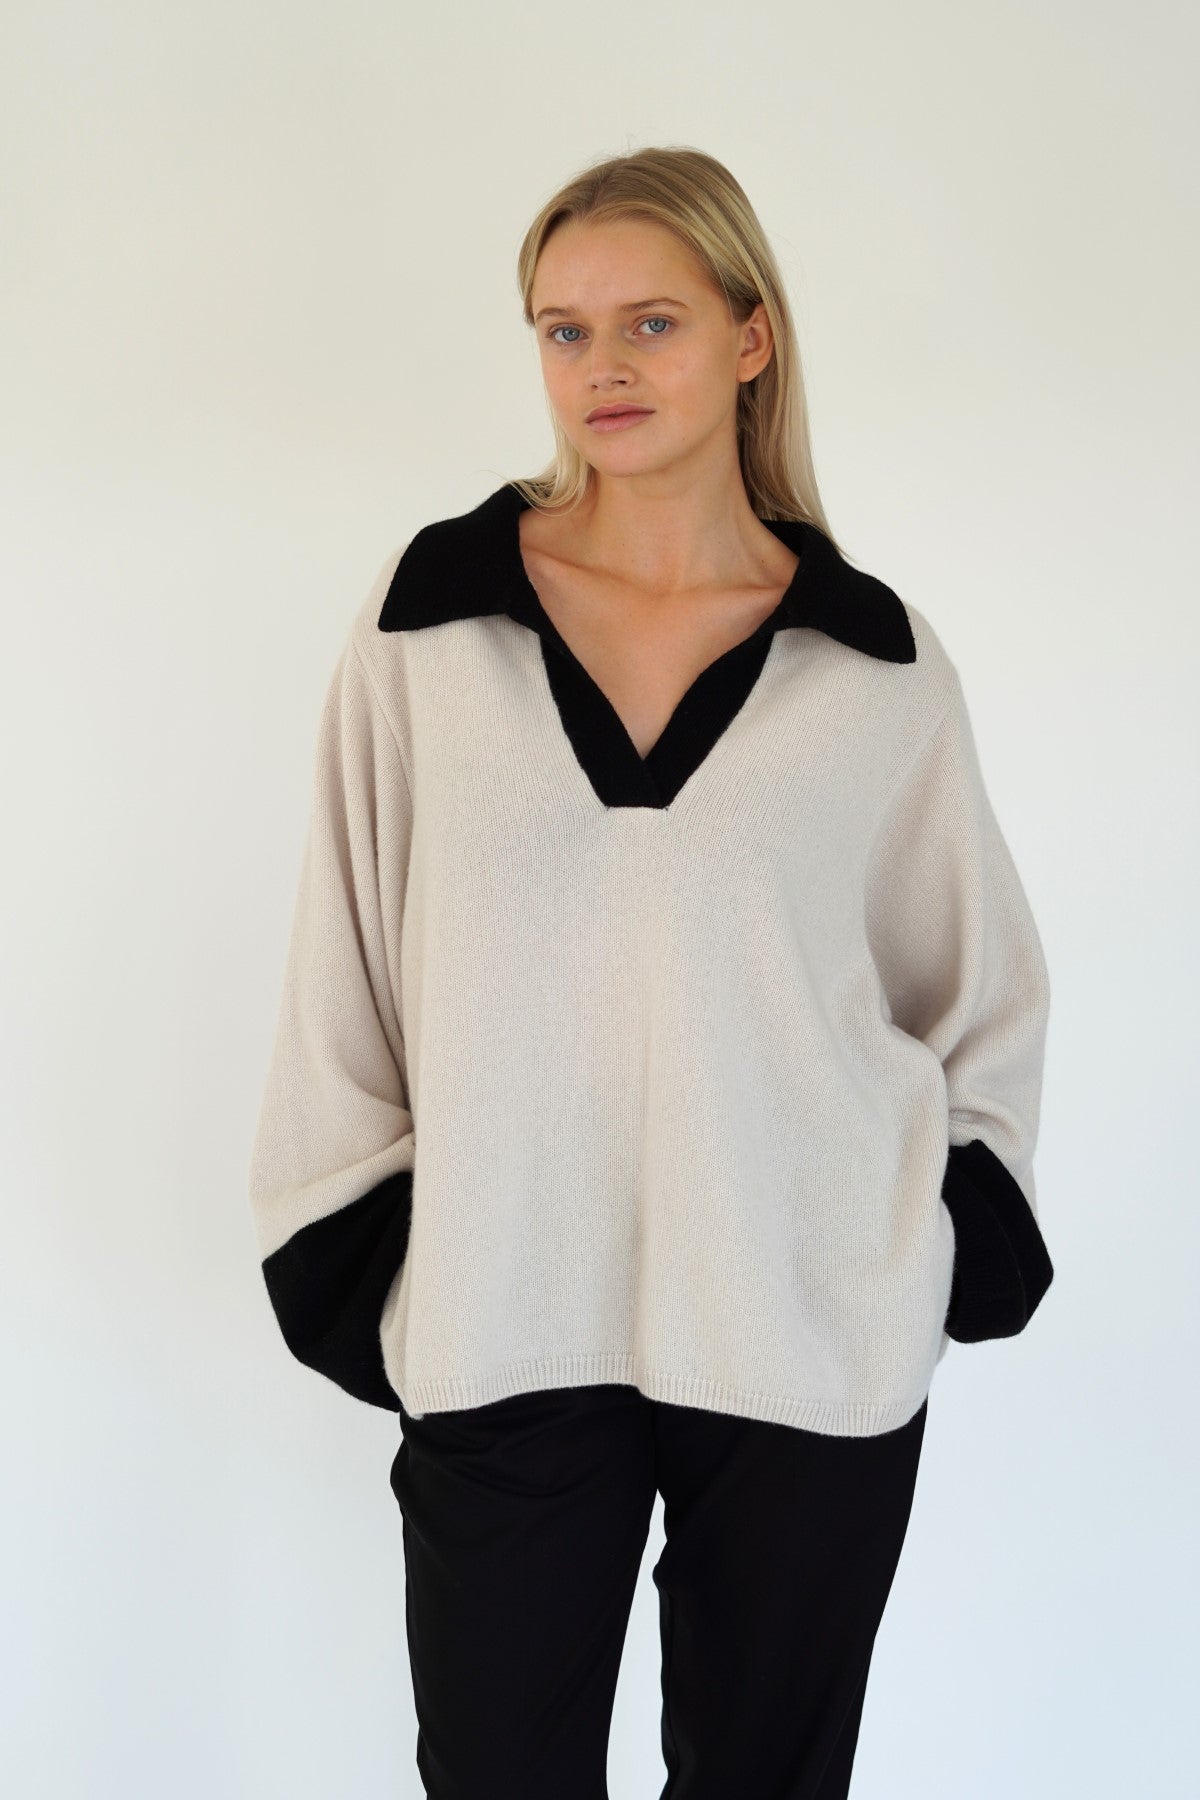 Cashmere sweater black sleeves and collar